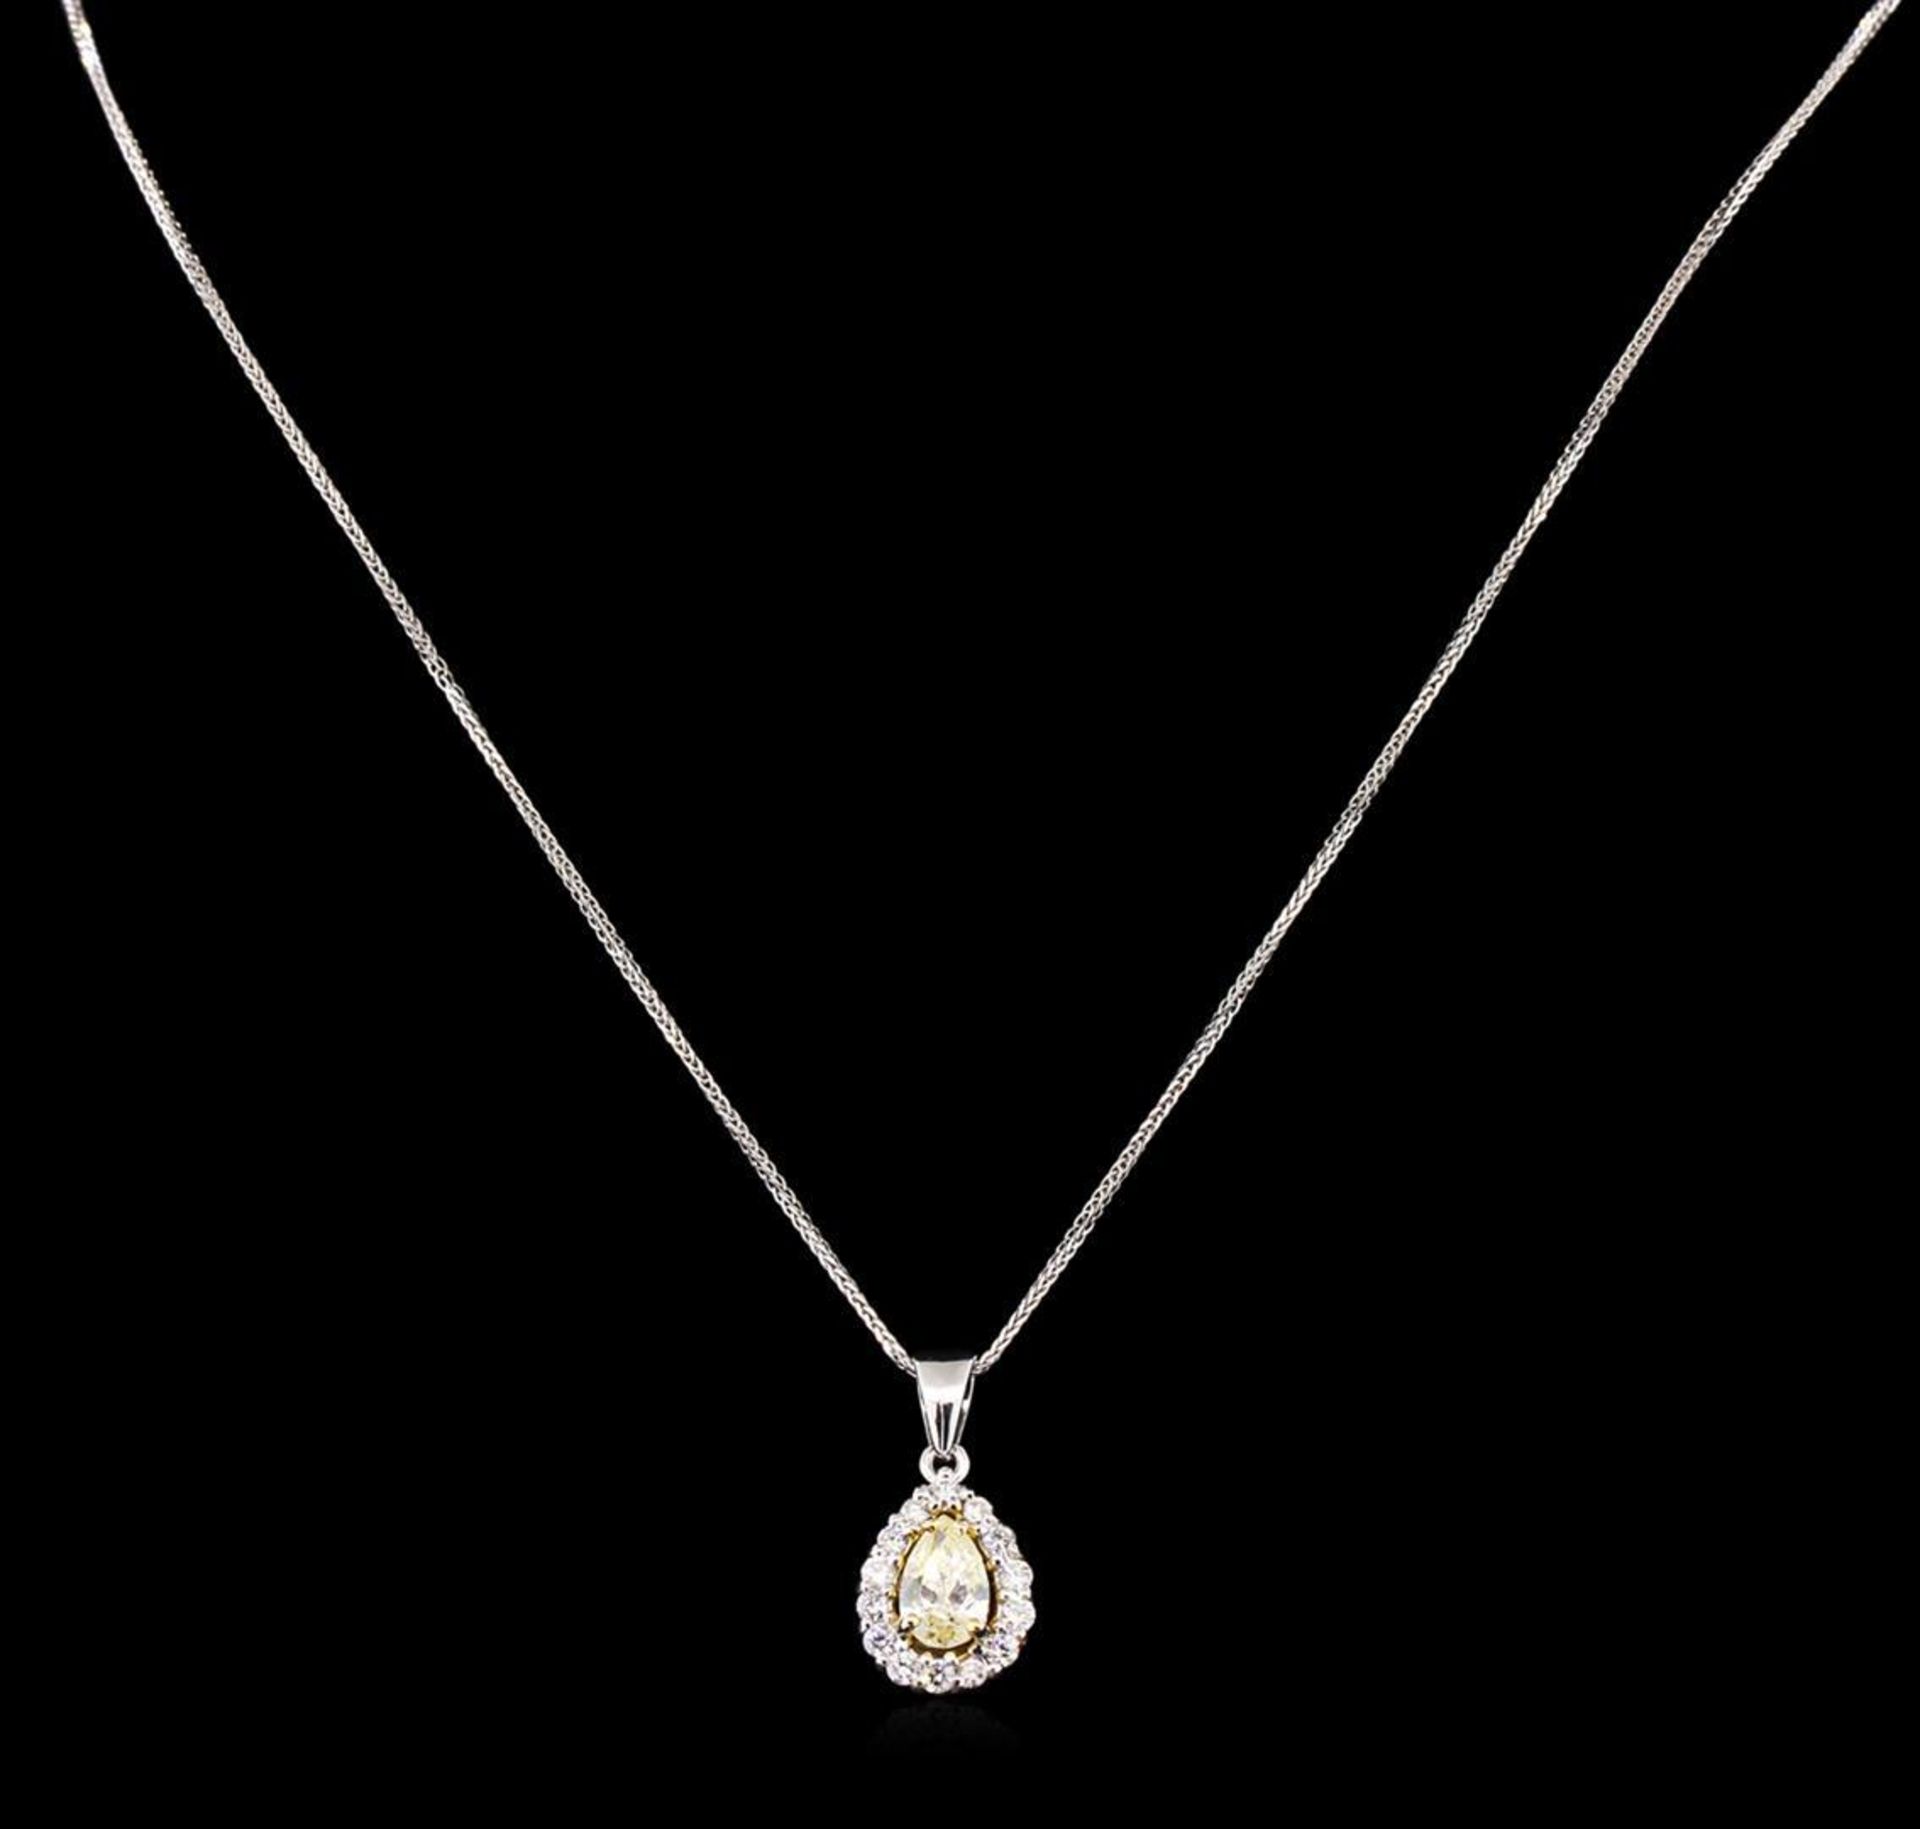 1.42 ctw Diamond Pendant With Chain - 14KT White Gold - Image 2 of 3